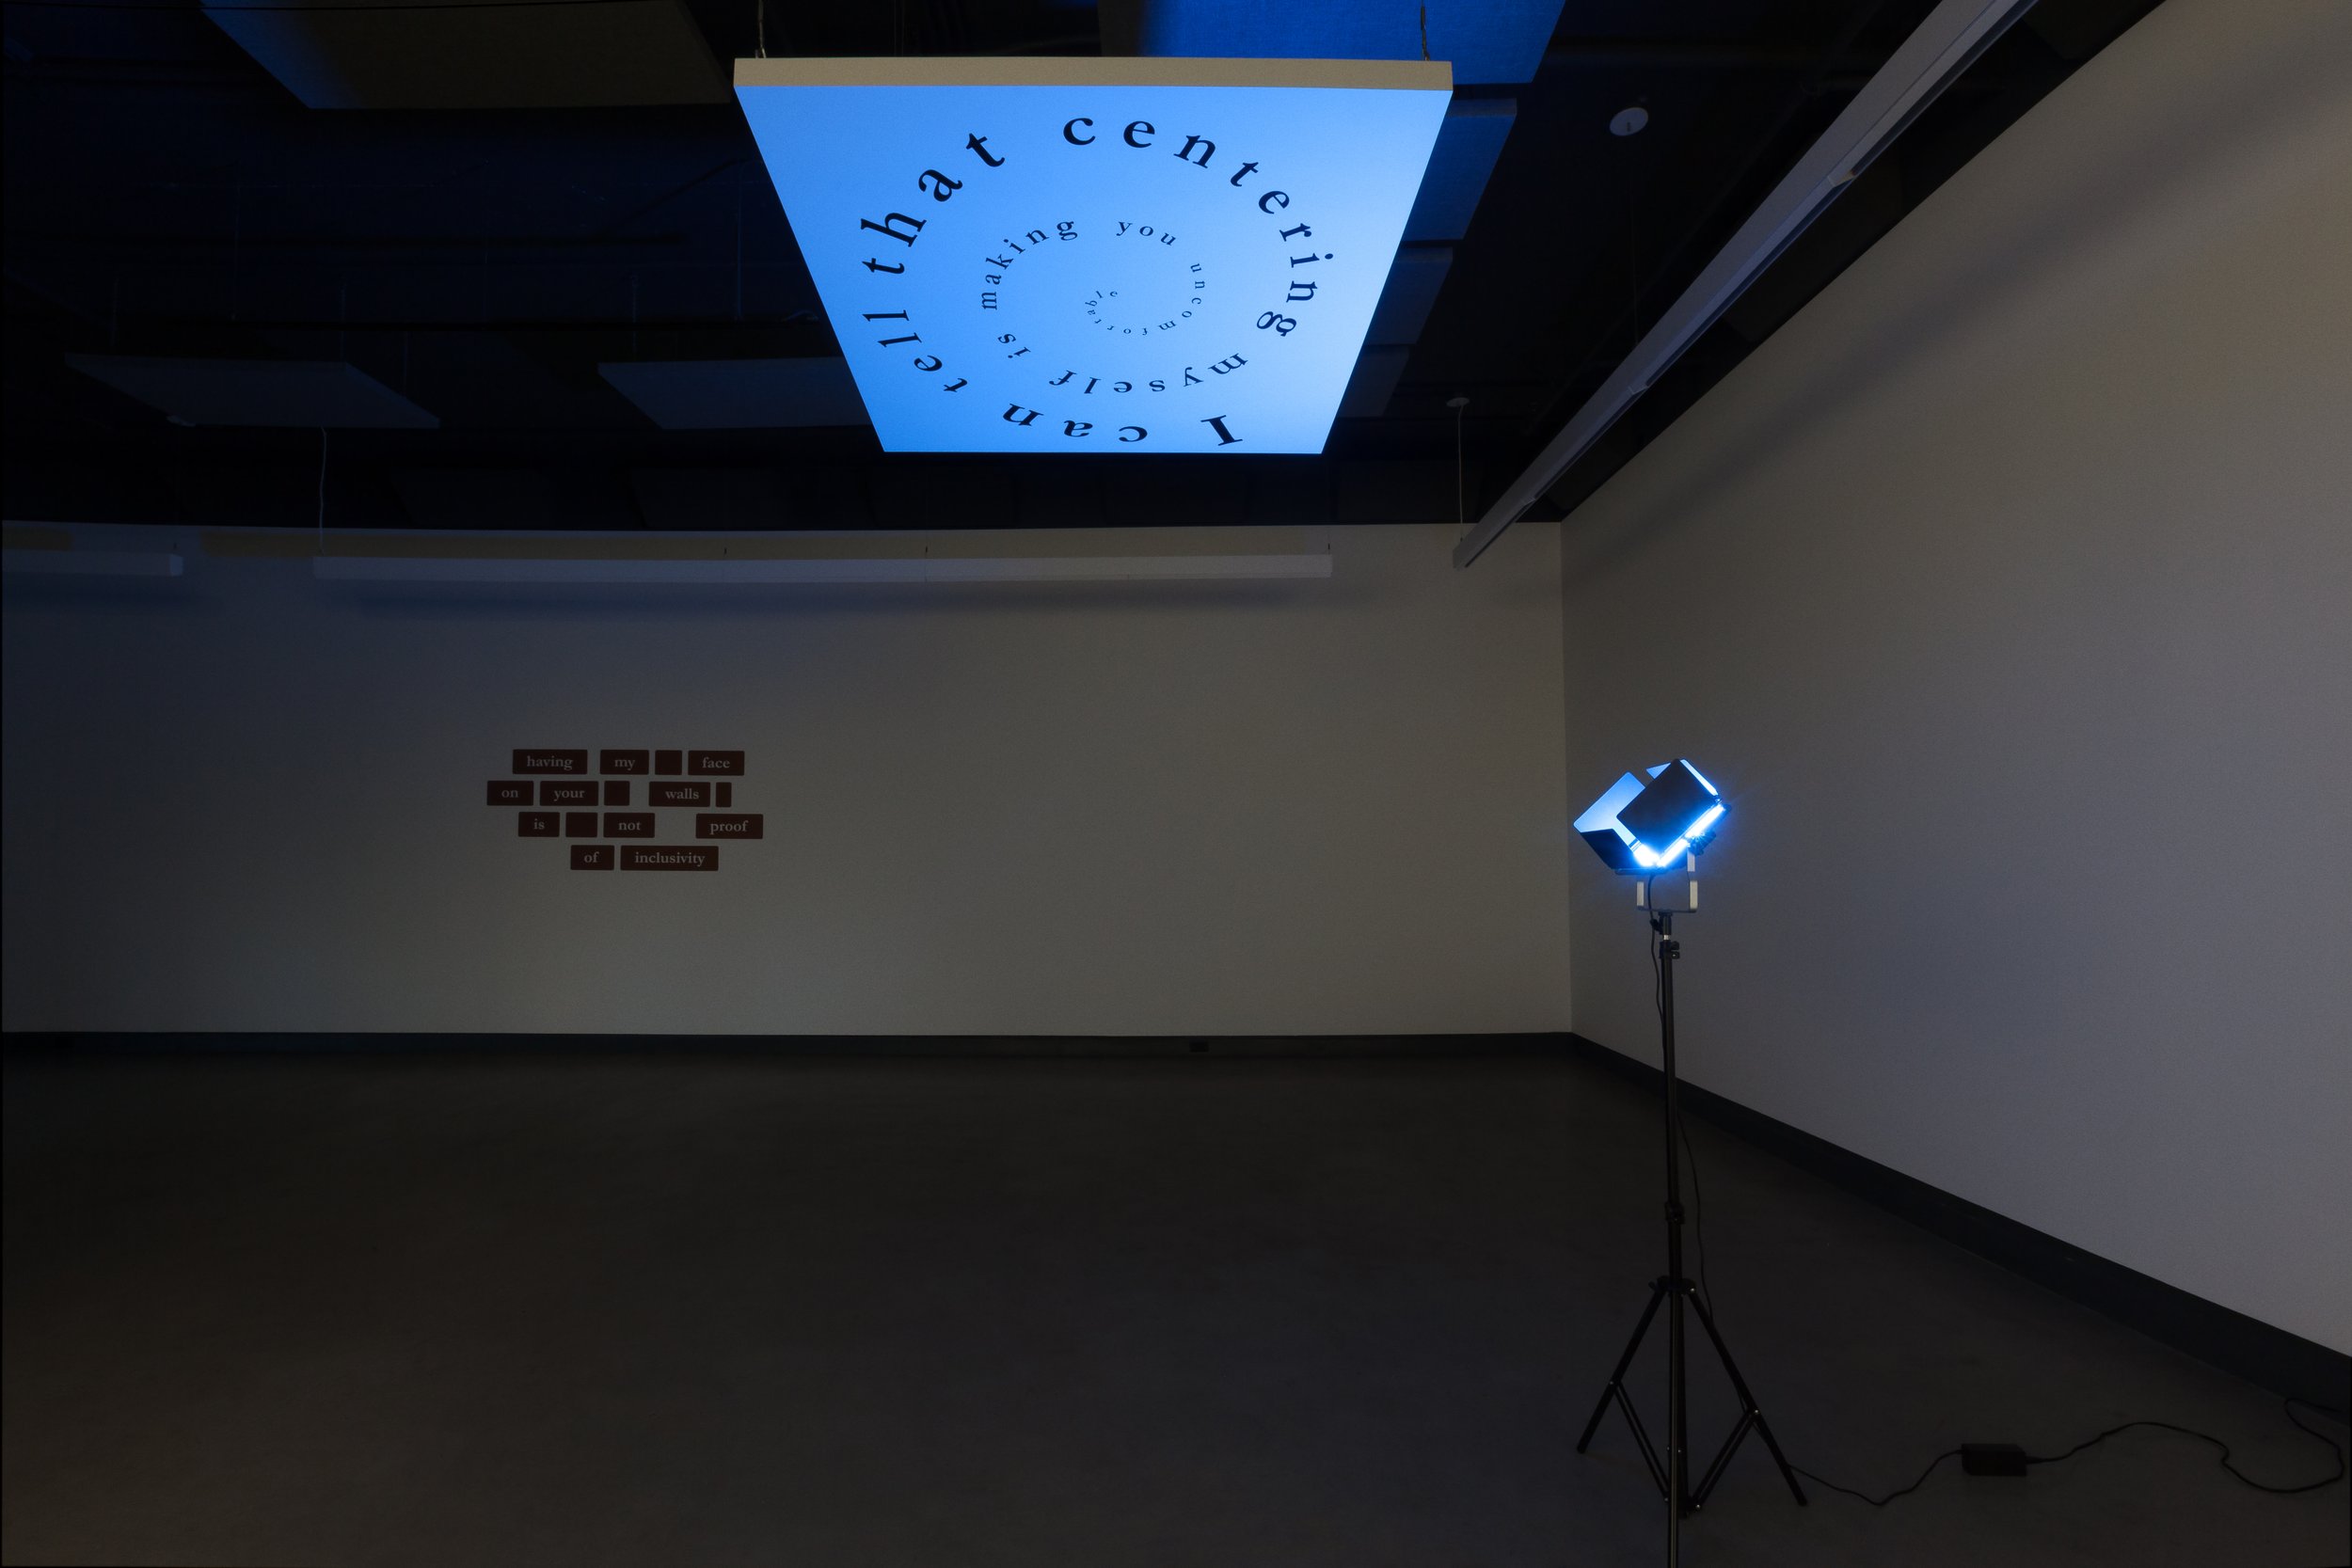  © Zinnia Naqvi, installation view from the exhibition the Translation is Approximate, Dazibao, 2021. Photo: Marilou Crispin. 